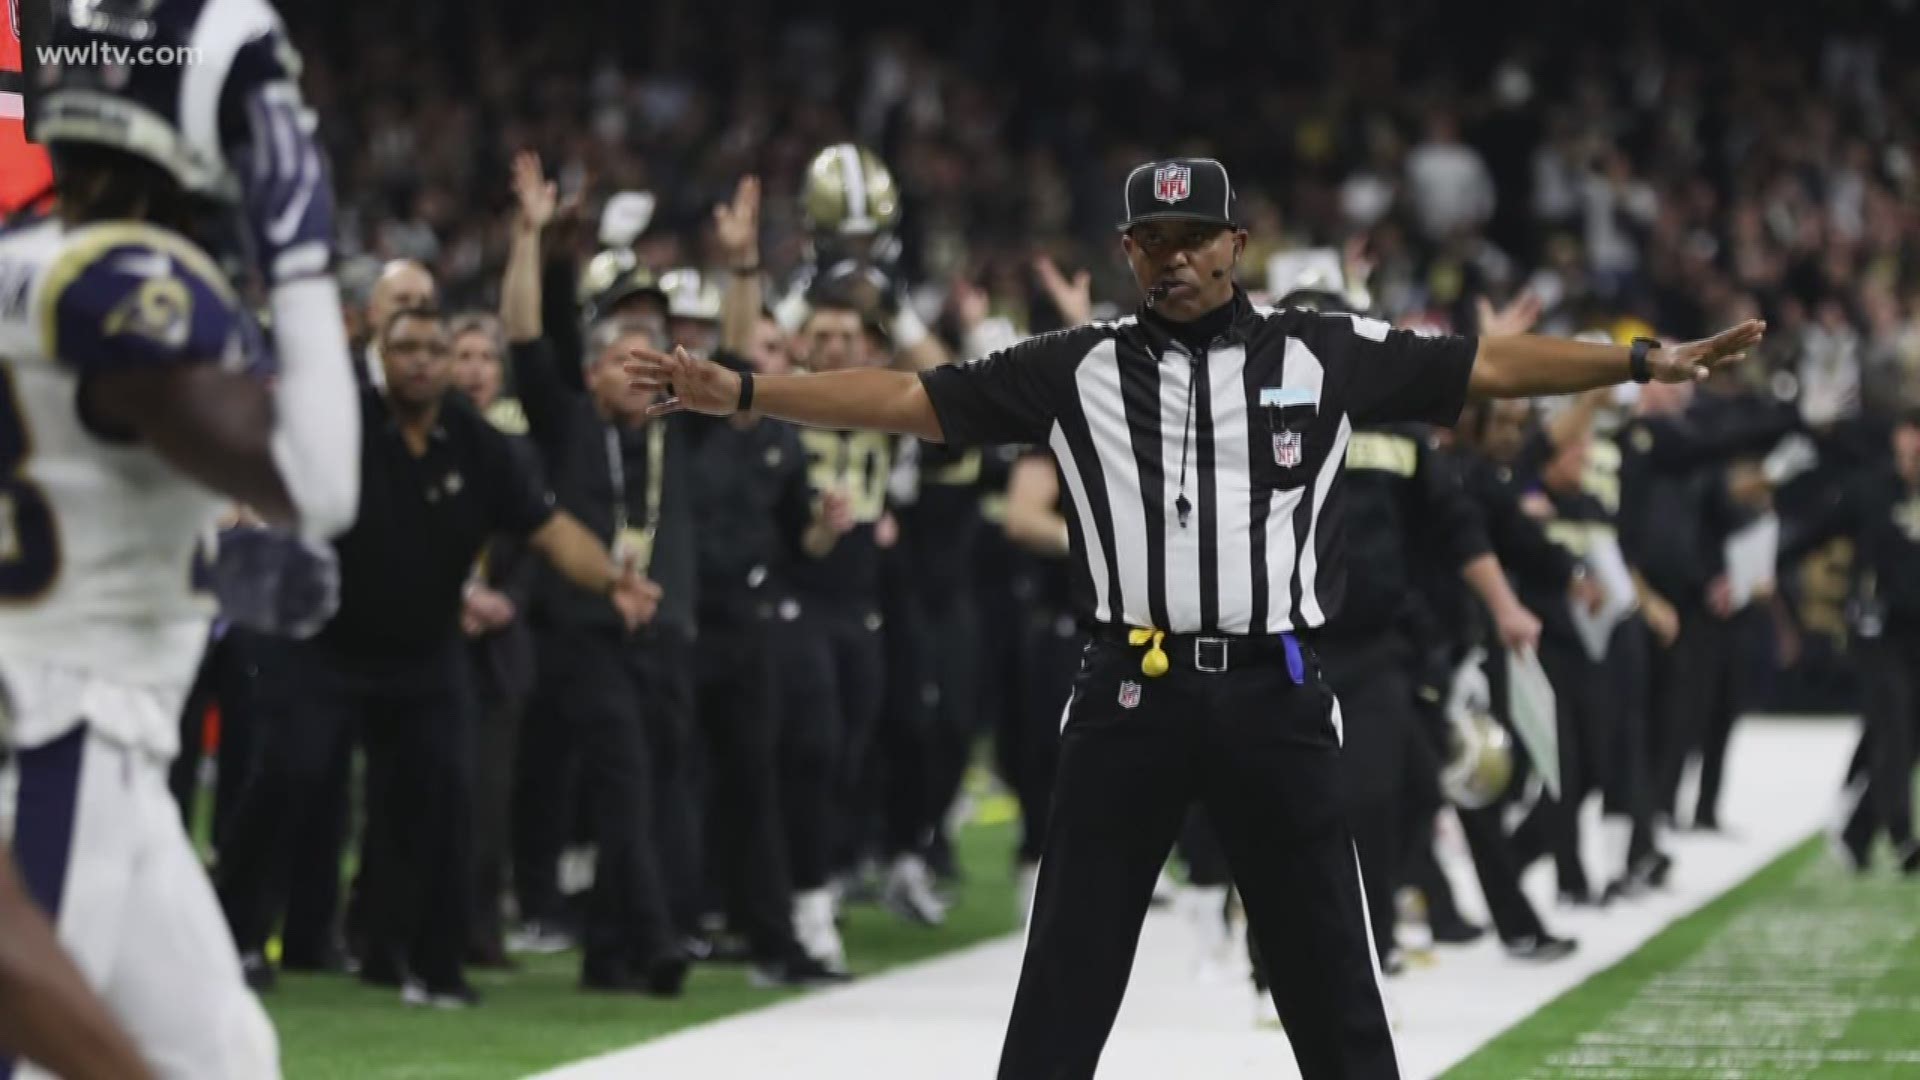 Could a "sky ref" be the answer to prevent no-calls like the one in the Saints' NFC championship loss?